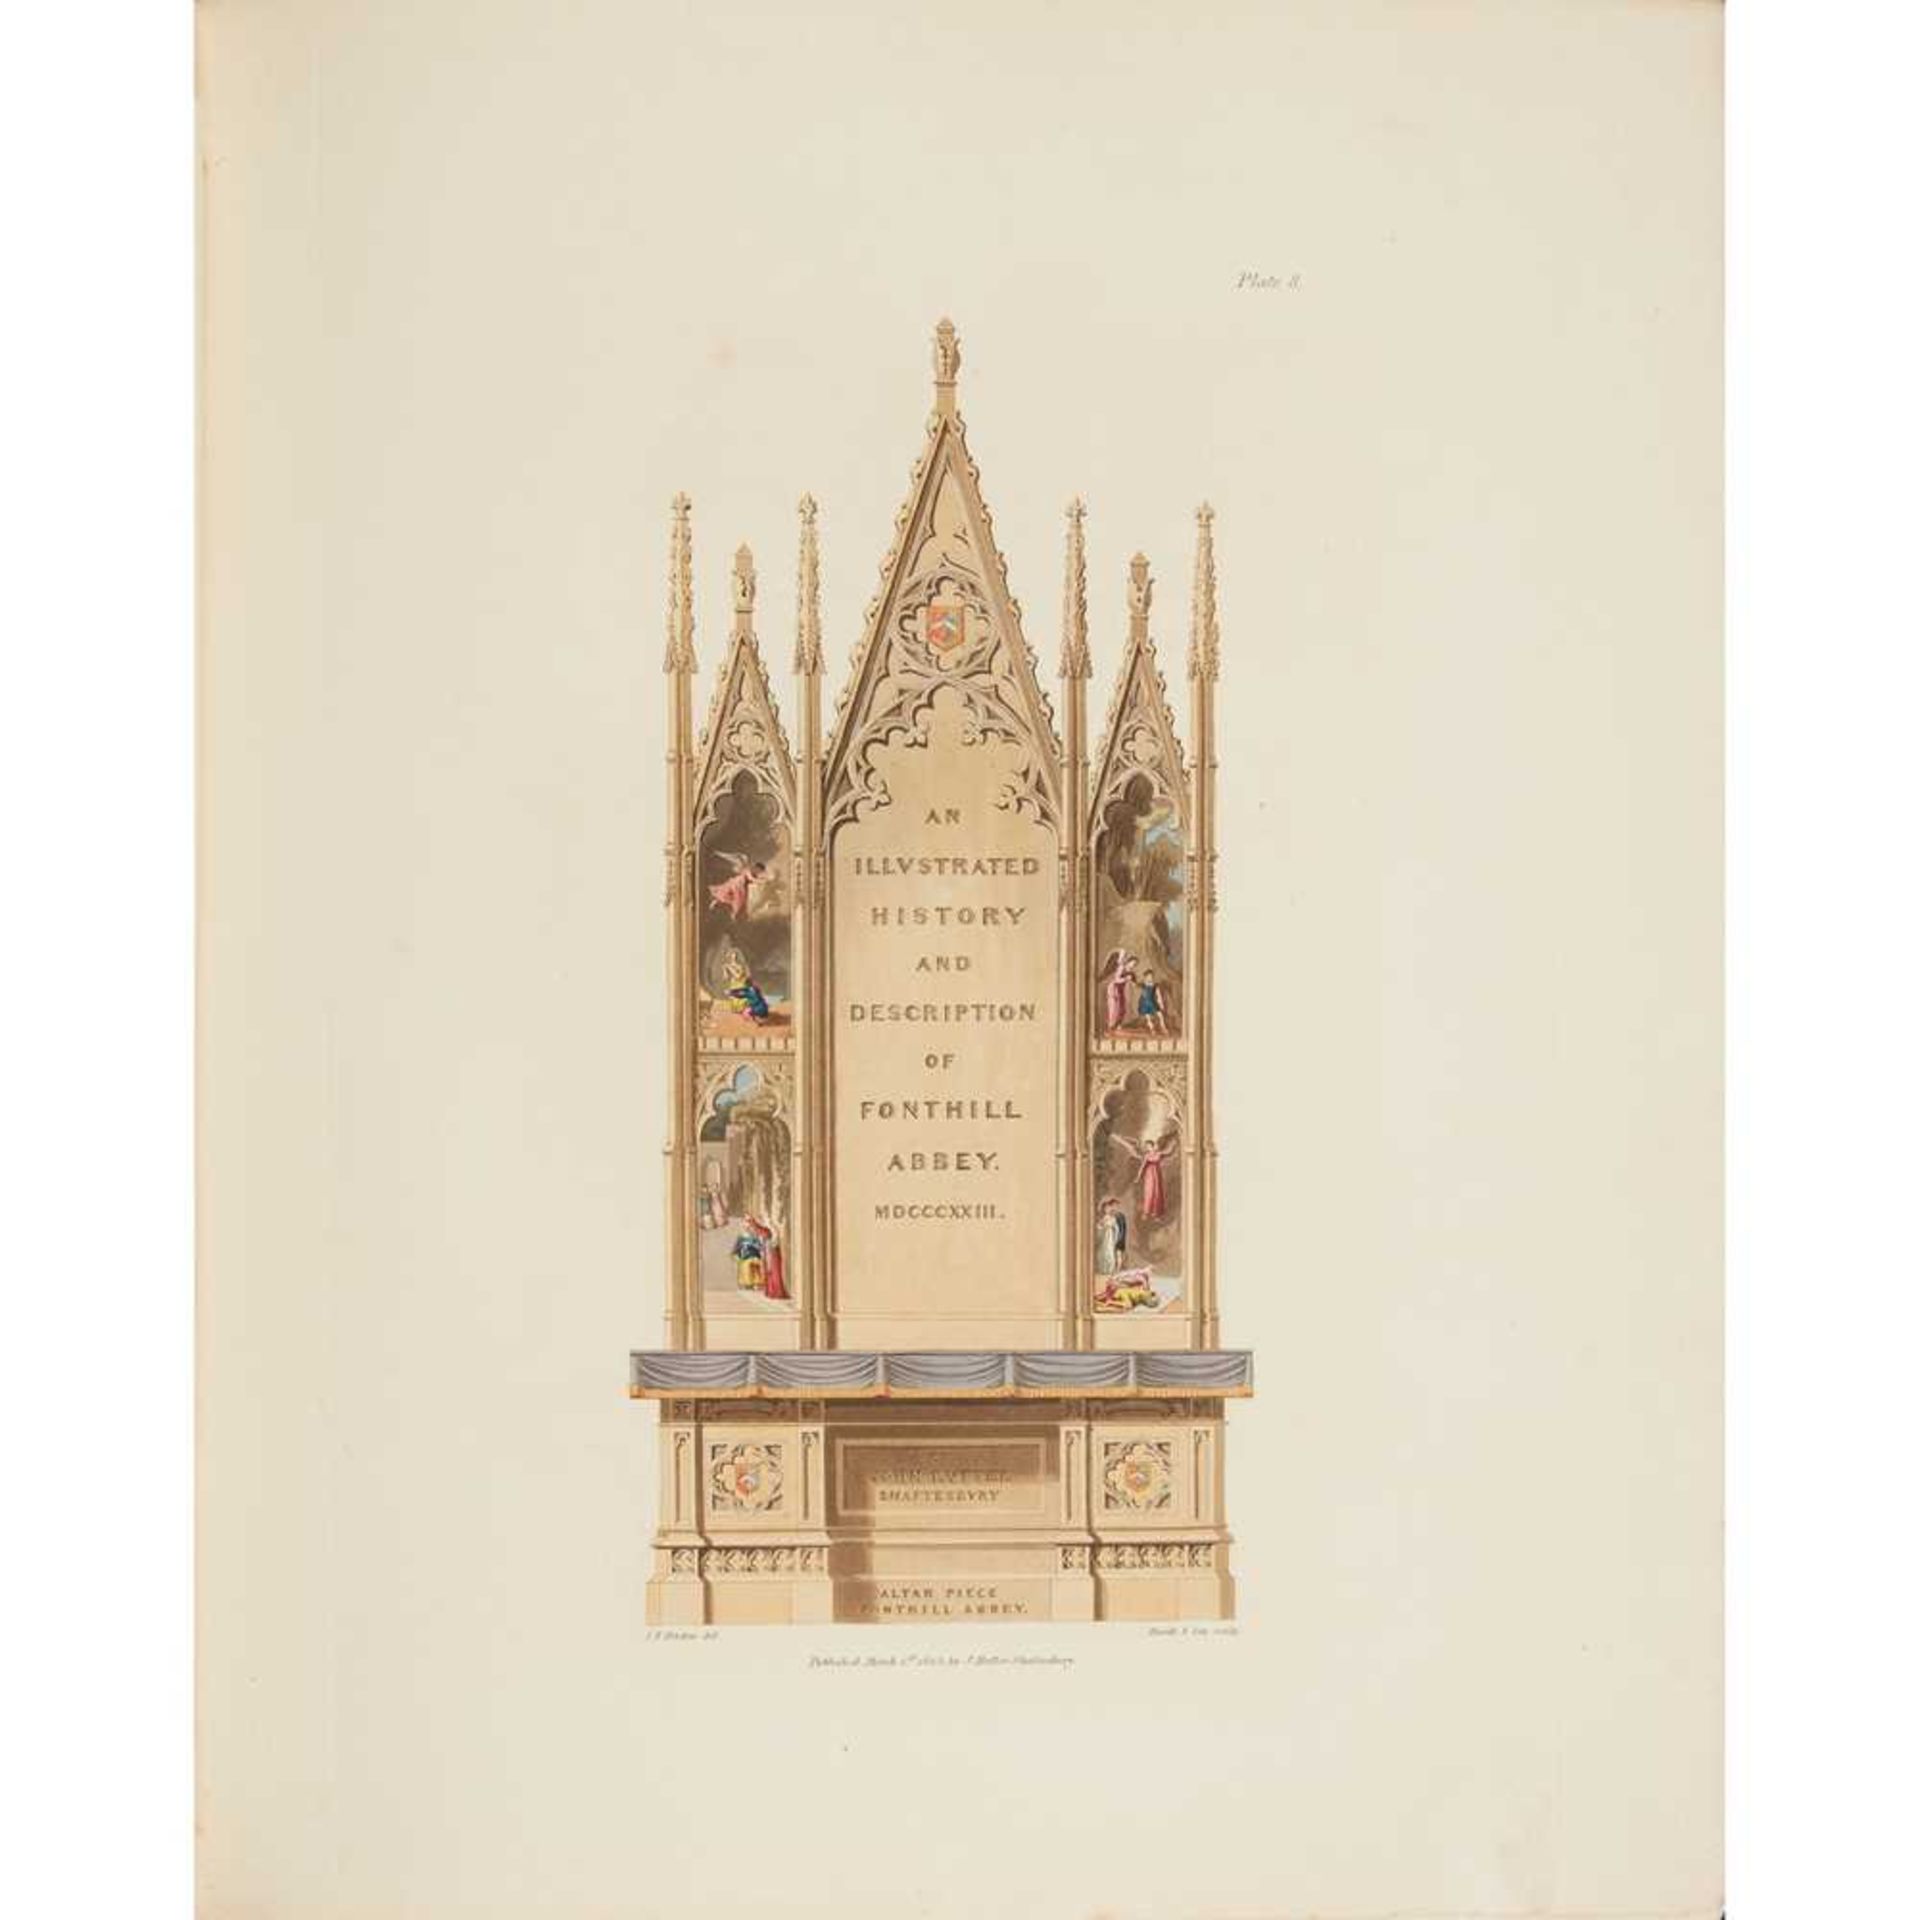 Rutter, John Delineations of Fonthill and its Abbey Shaftesbury: by the author, 1823. 4to, hand- - Image 2 of 2